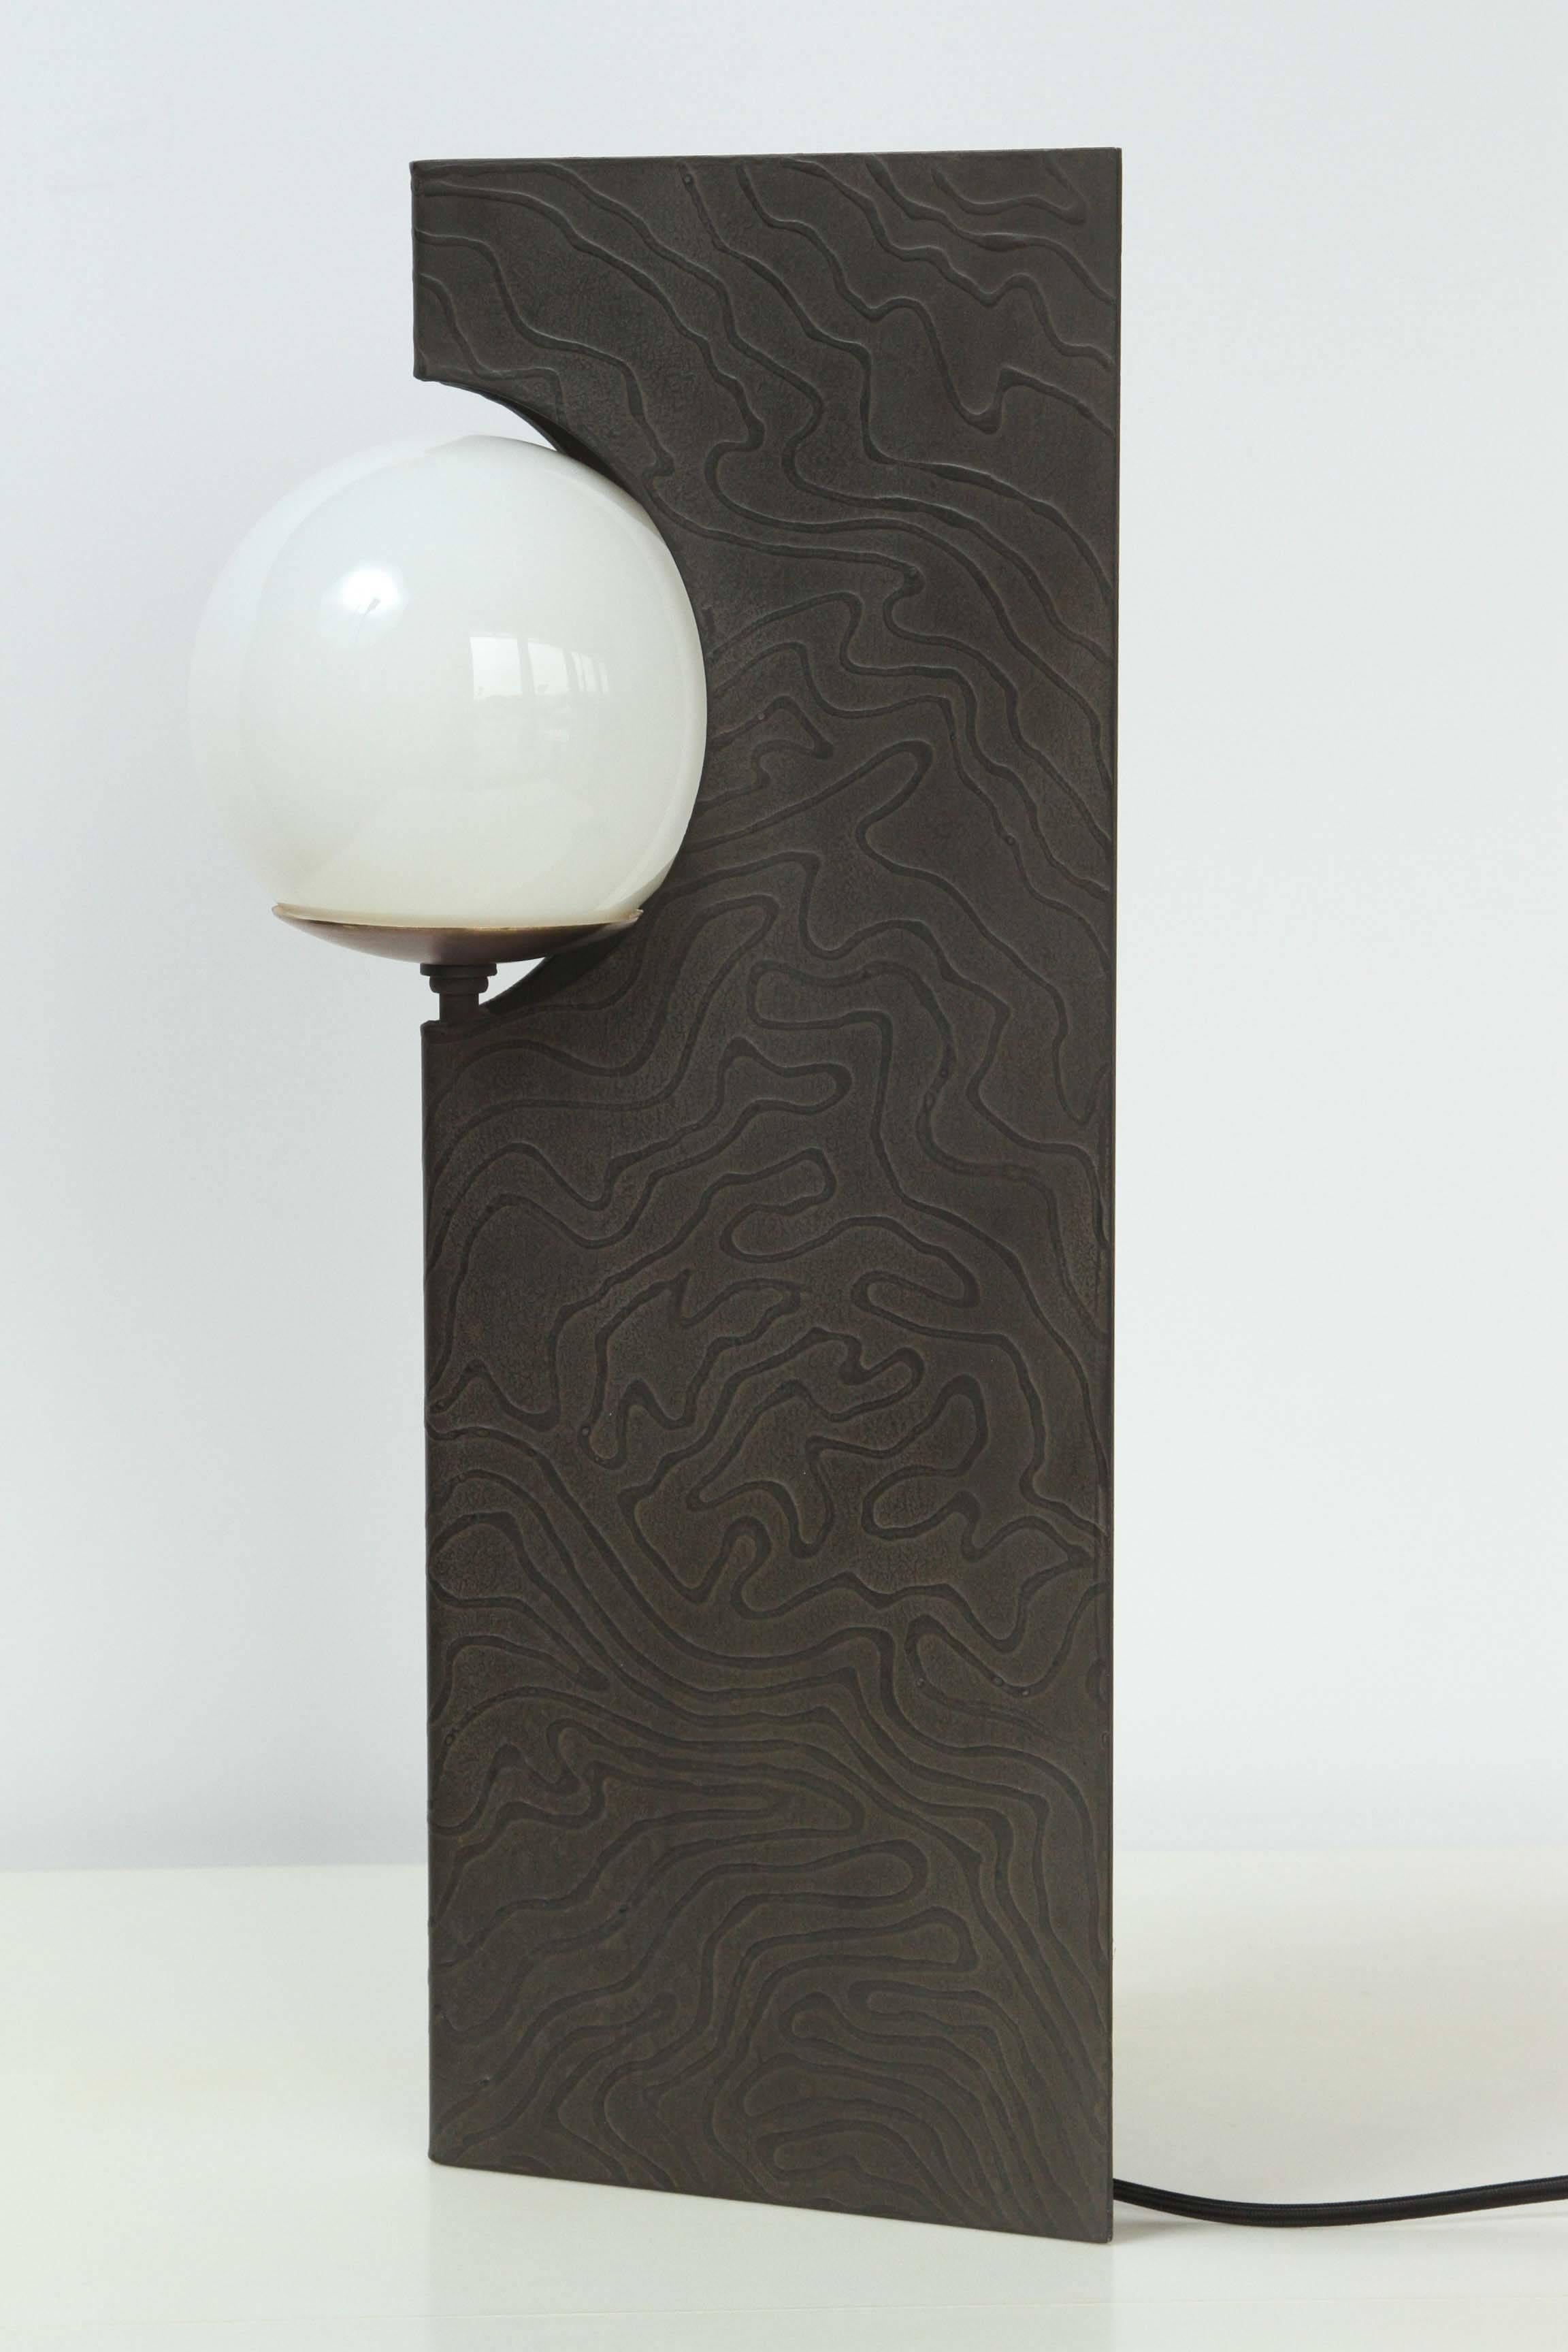 Paul Marra Textured Steel Solitaire Desk or Table Lamp For Sale 2